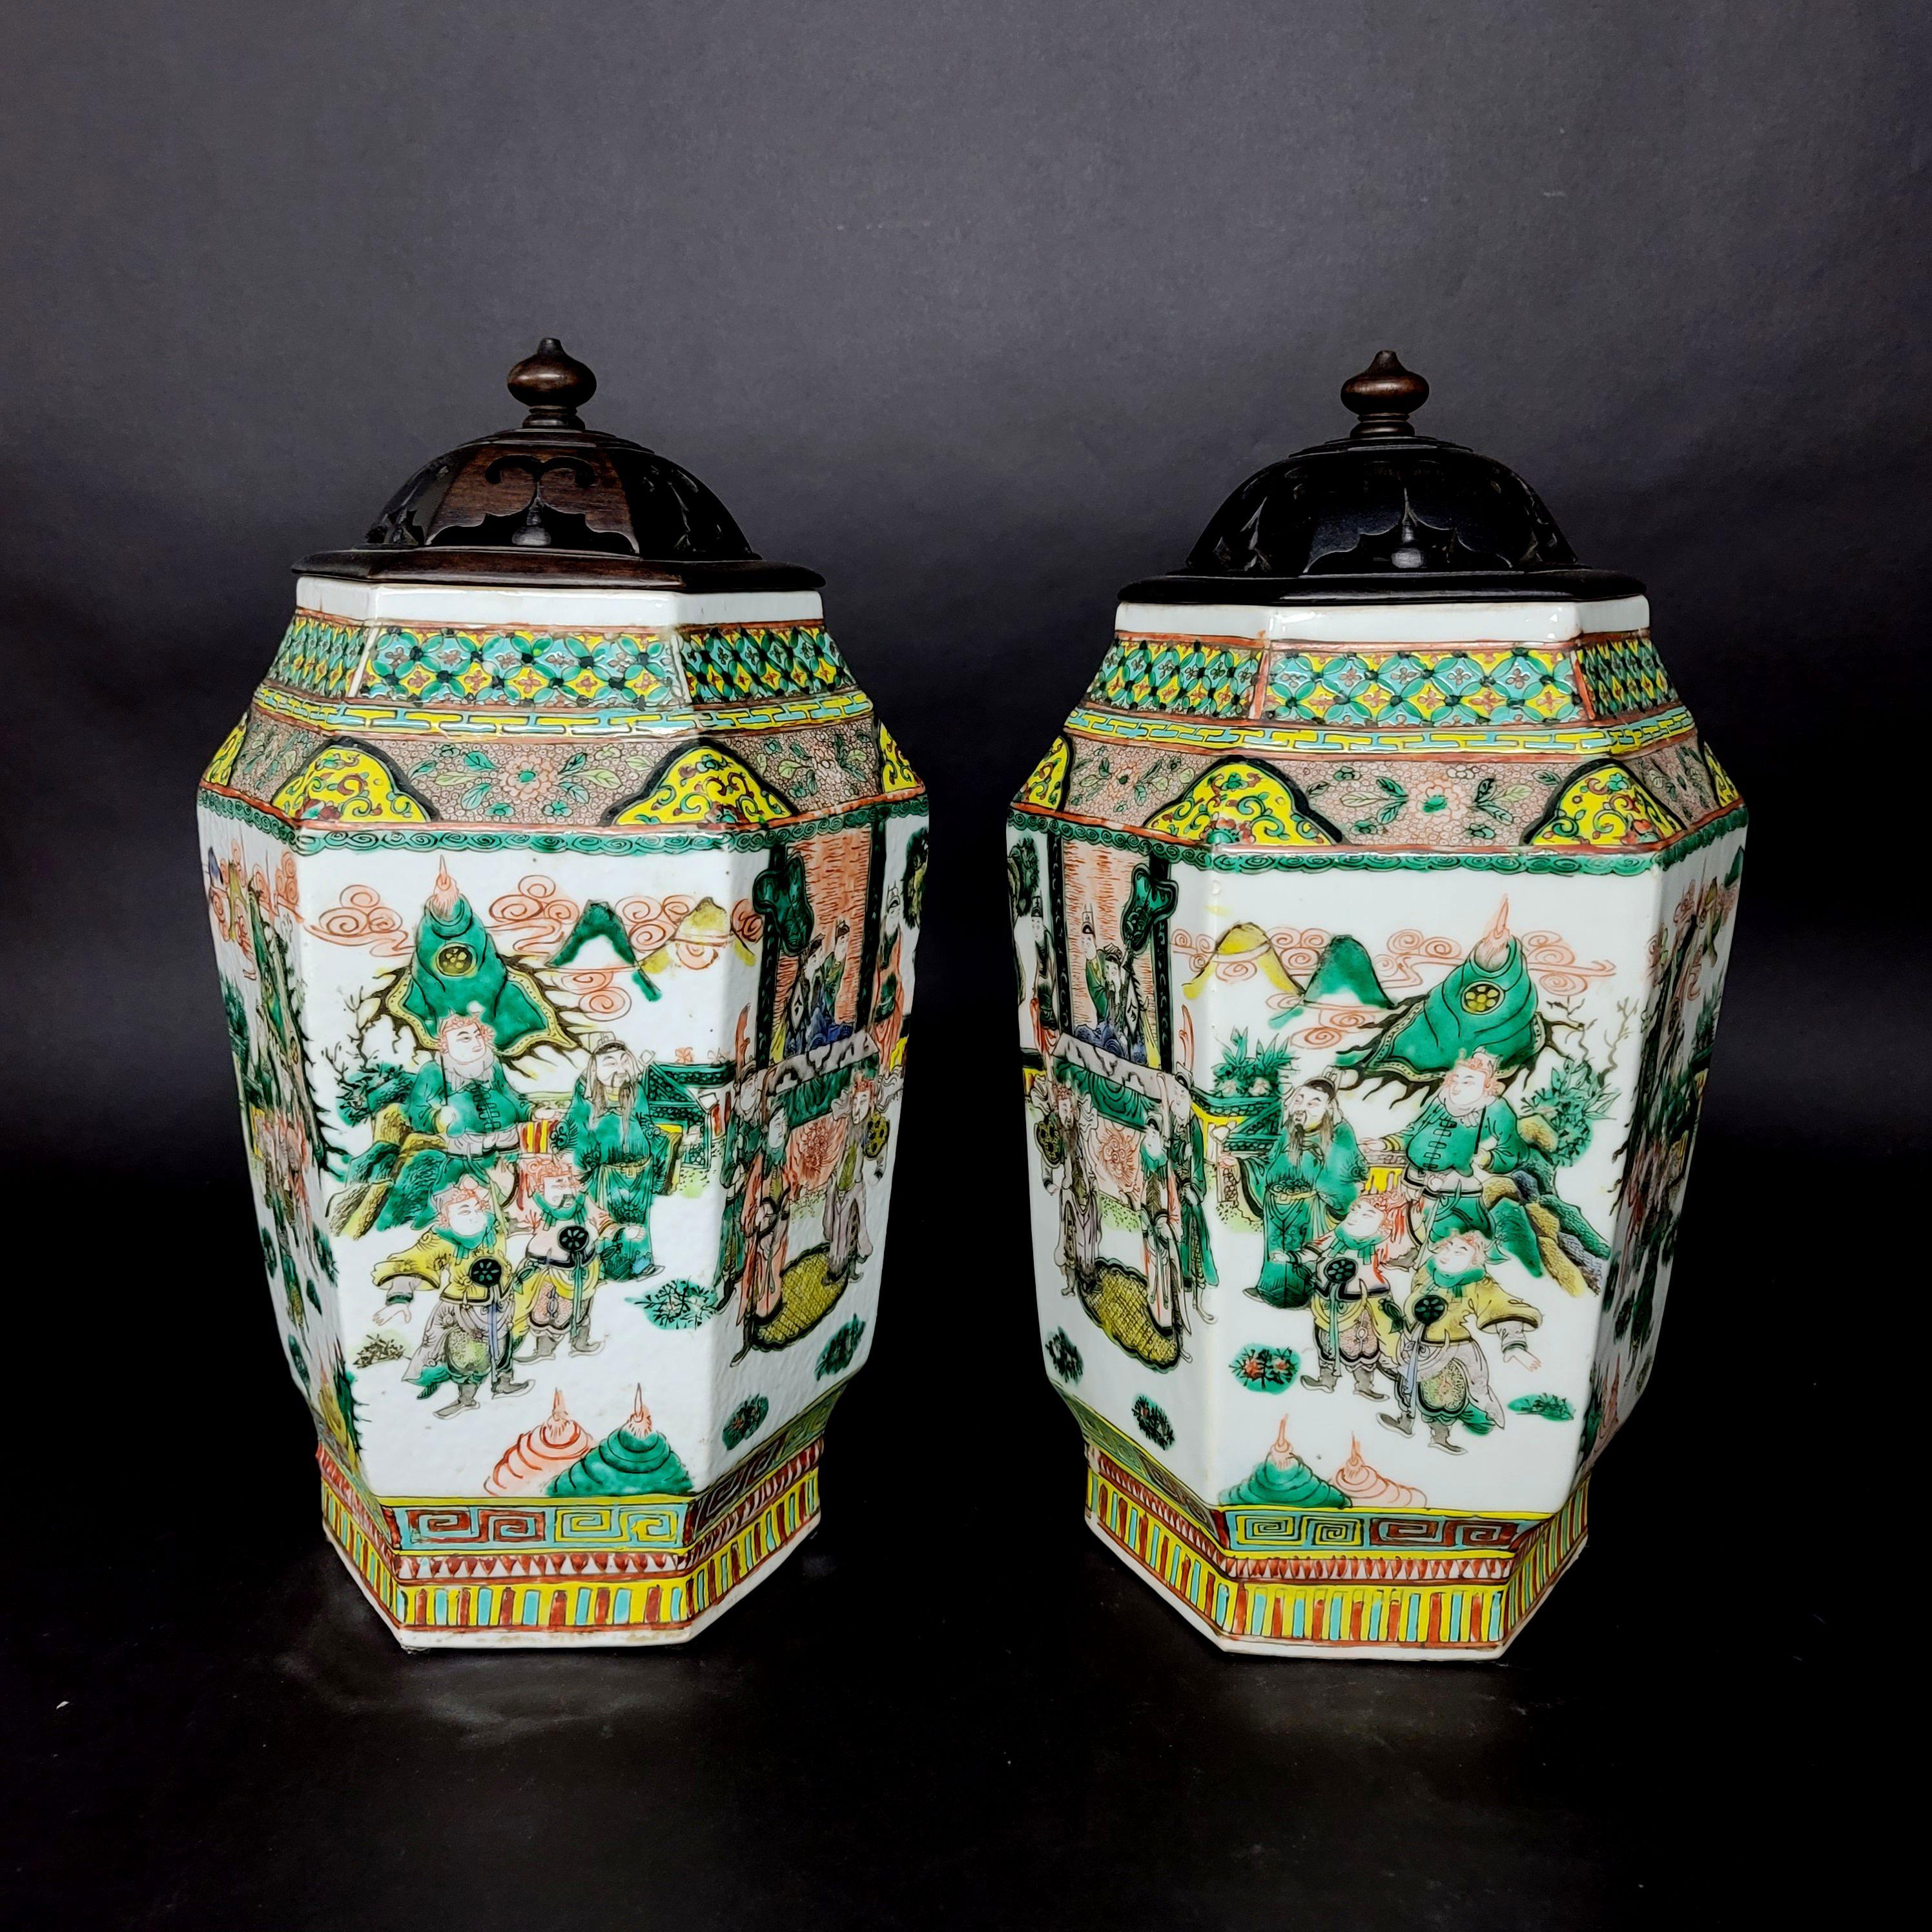 A truly fine hand-painted matching images of porcelain vases, amazing quality from Qing Dynasty Famille rose polychrome decorated panels of courtly pursuits with carved hardwood lids.

 